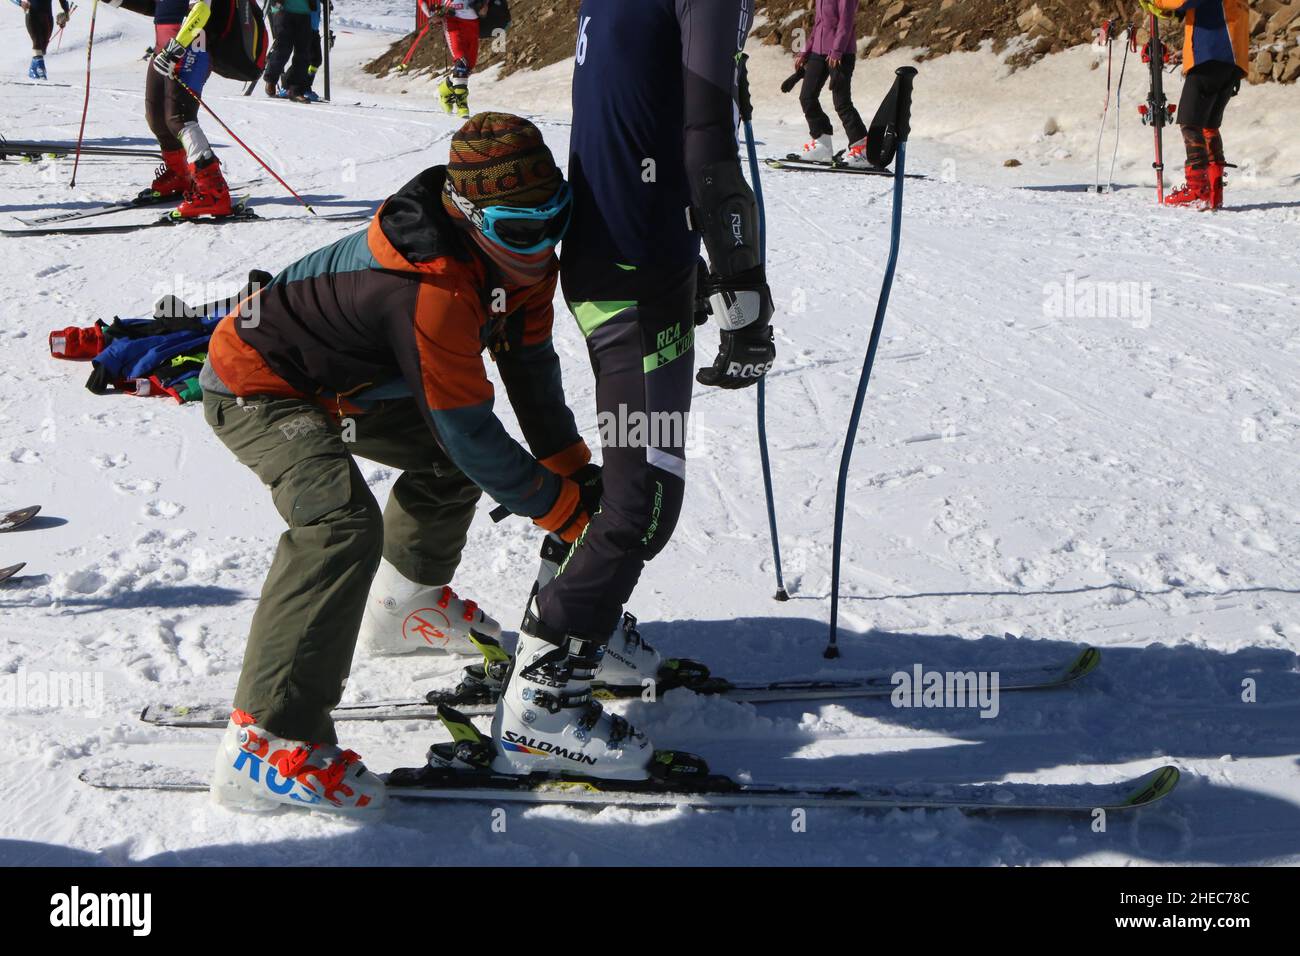 Ski In Iran High Resolution Stock Photography and Images - Alamy